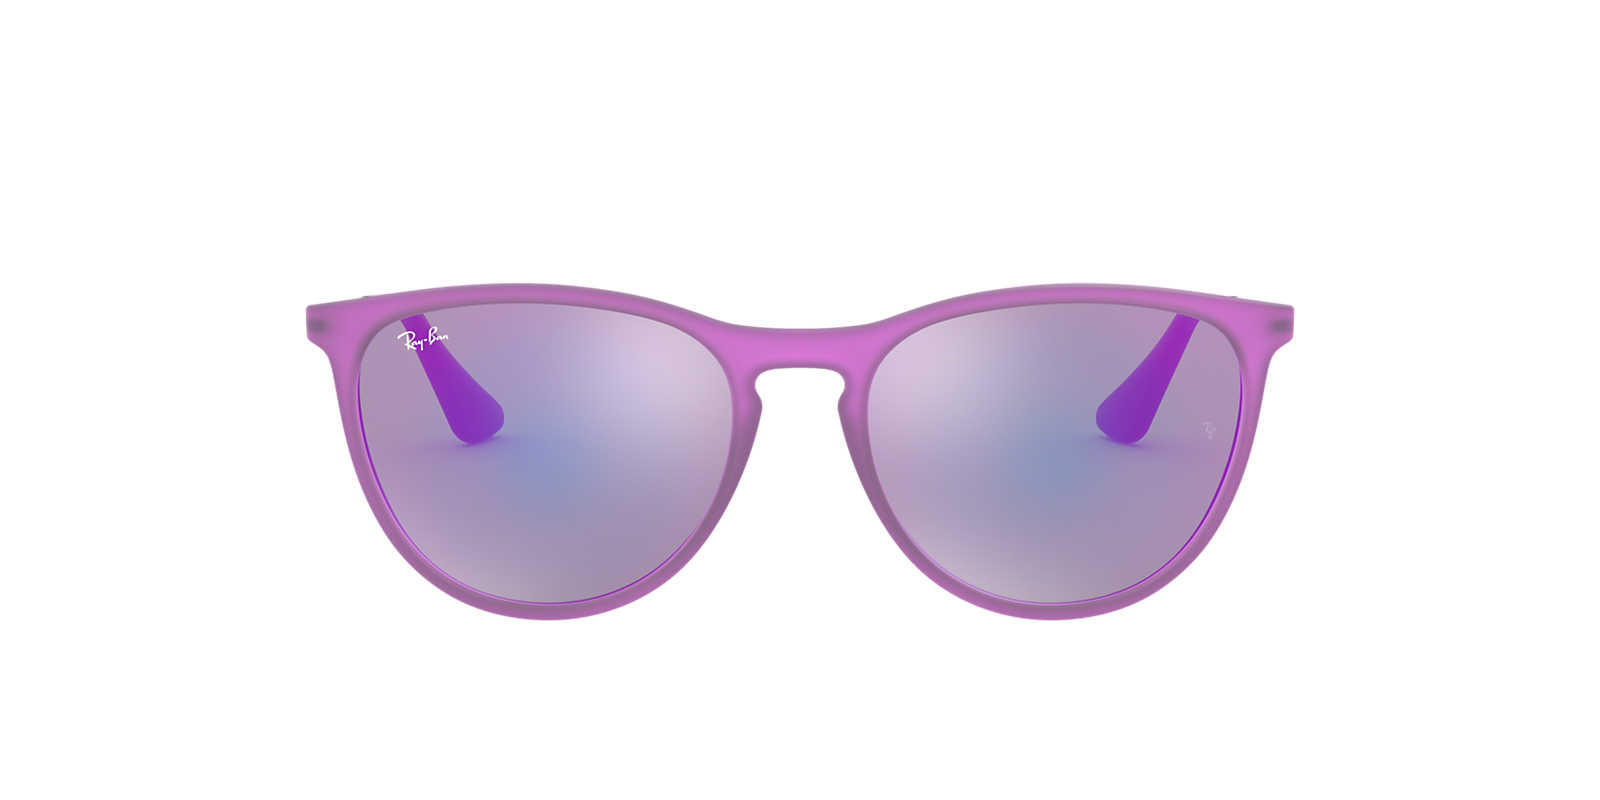 New cheap ray ban sunglasses clubmaster online 2019